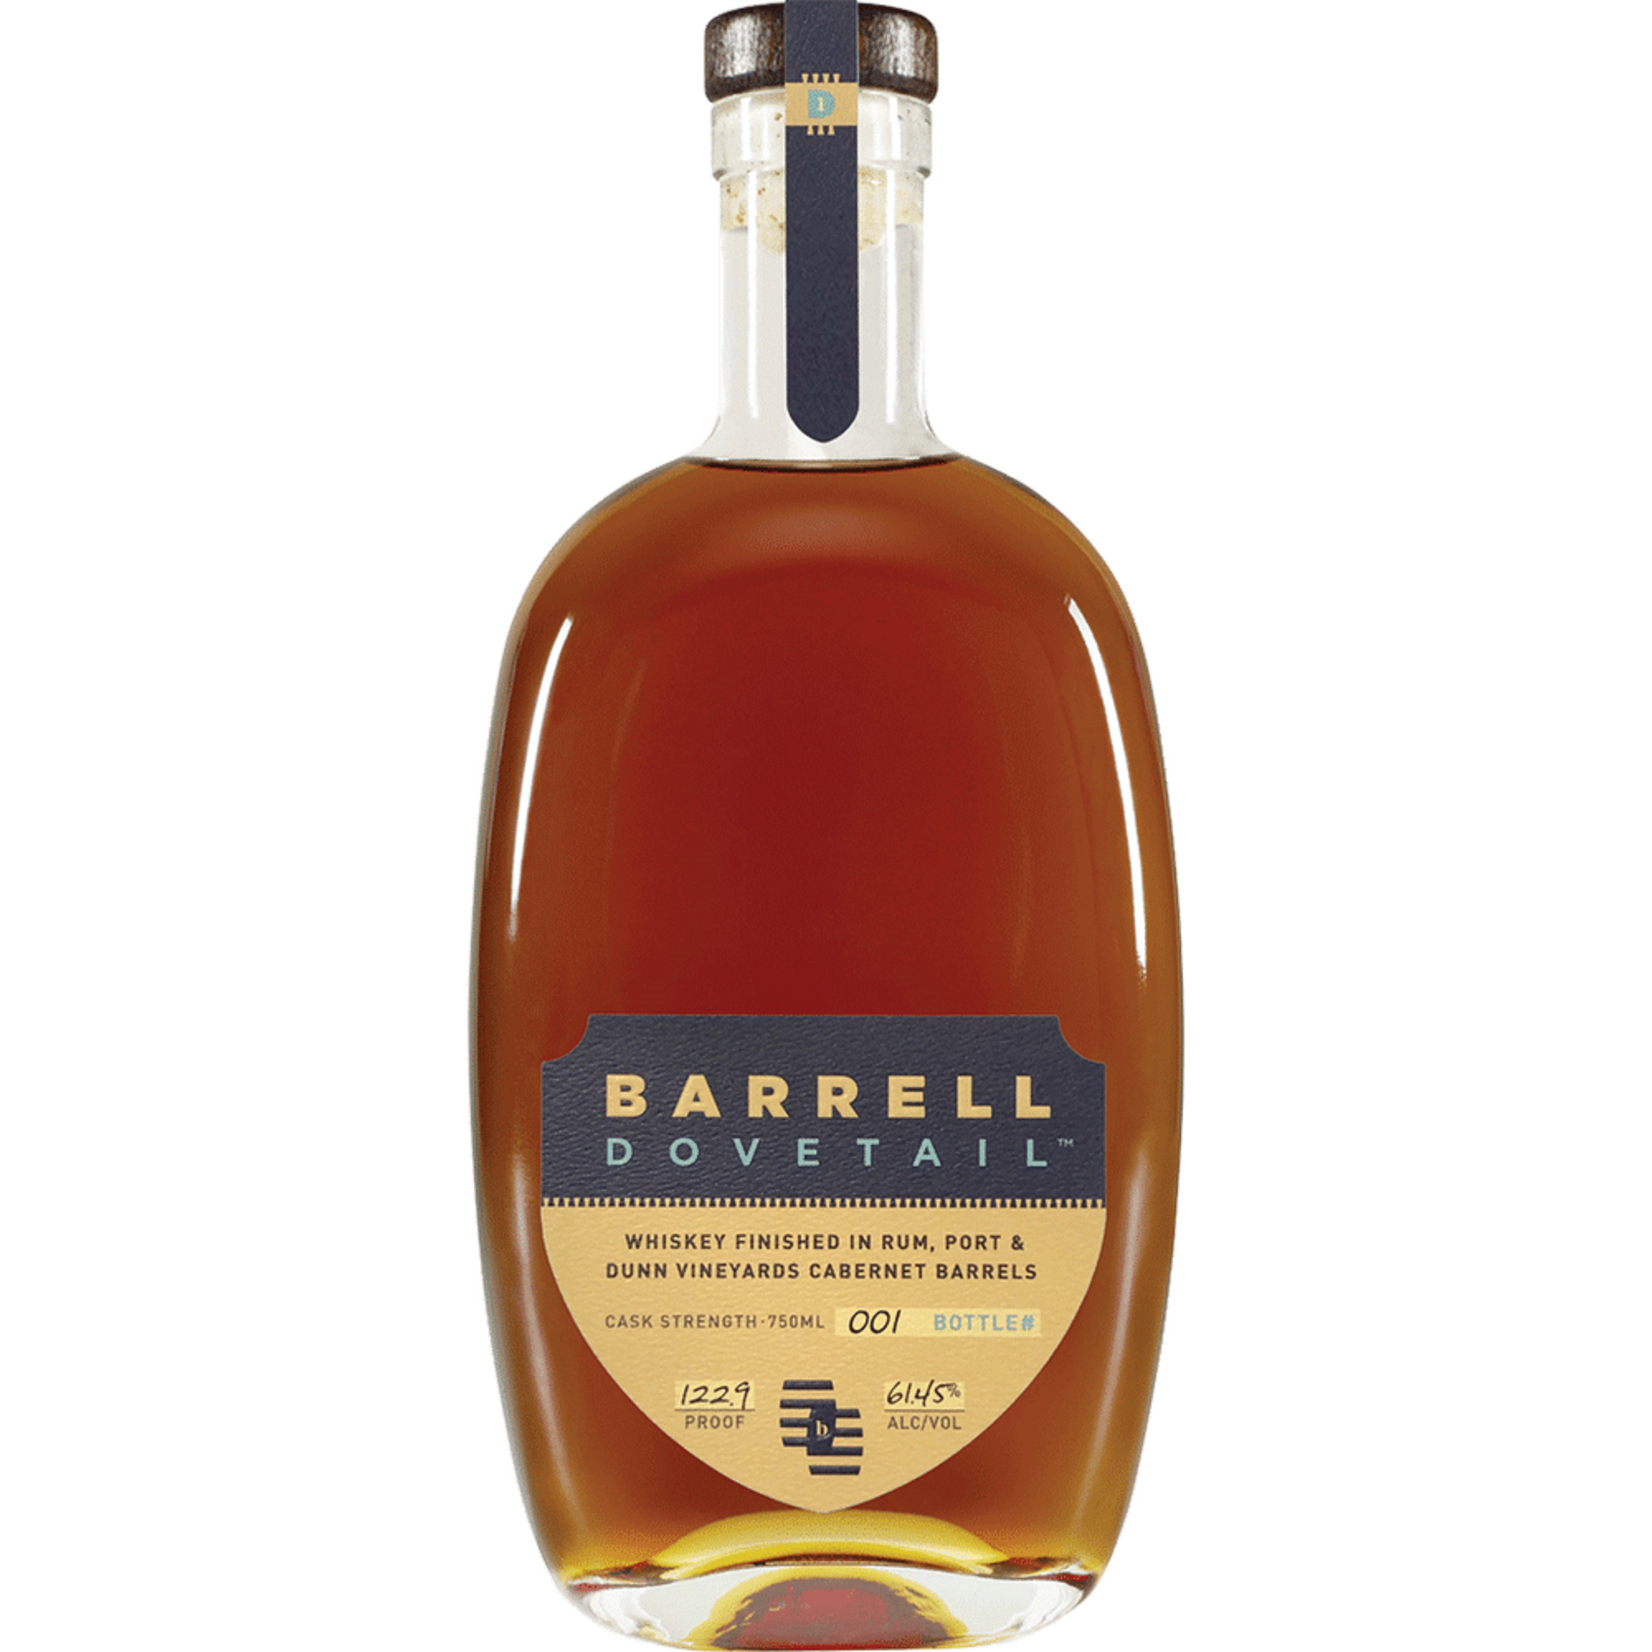 Barrell Dovetail 124.7Proof 750ml